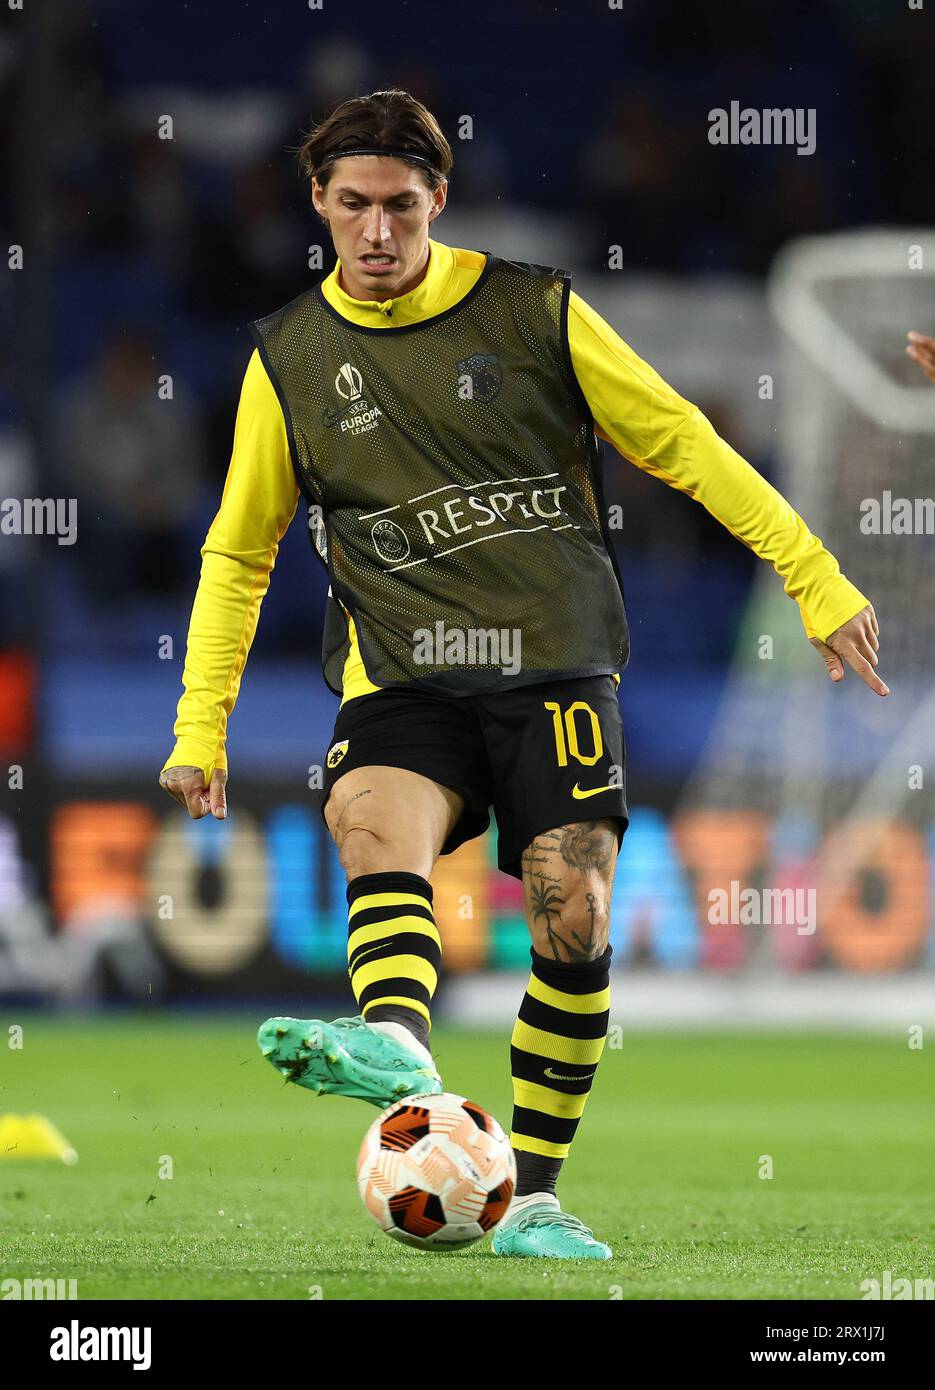 Brighton and Hove, UK. 21st Sep, 2023. Steven Zuber of AEK Athens during the UEFA Europa League match at the AMEX Stadium, Brighton and Hove. Picture credit should read: Paul Terry/Sportimage Credit: Sportimage Ltd/Alamy Live News Stock Photo